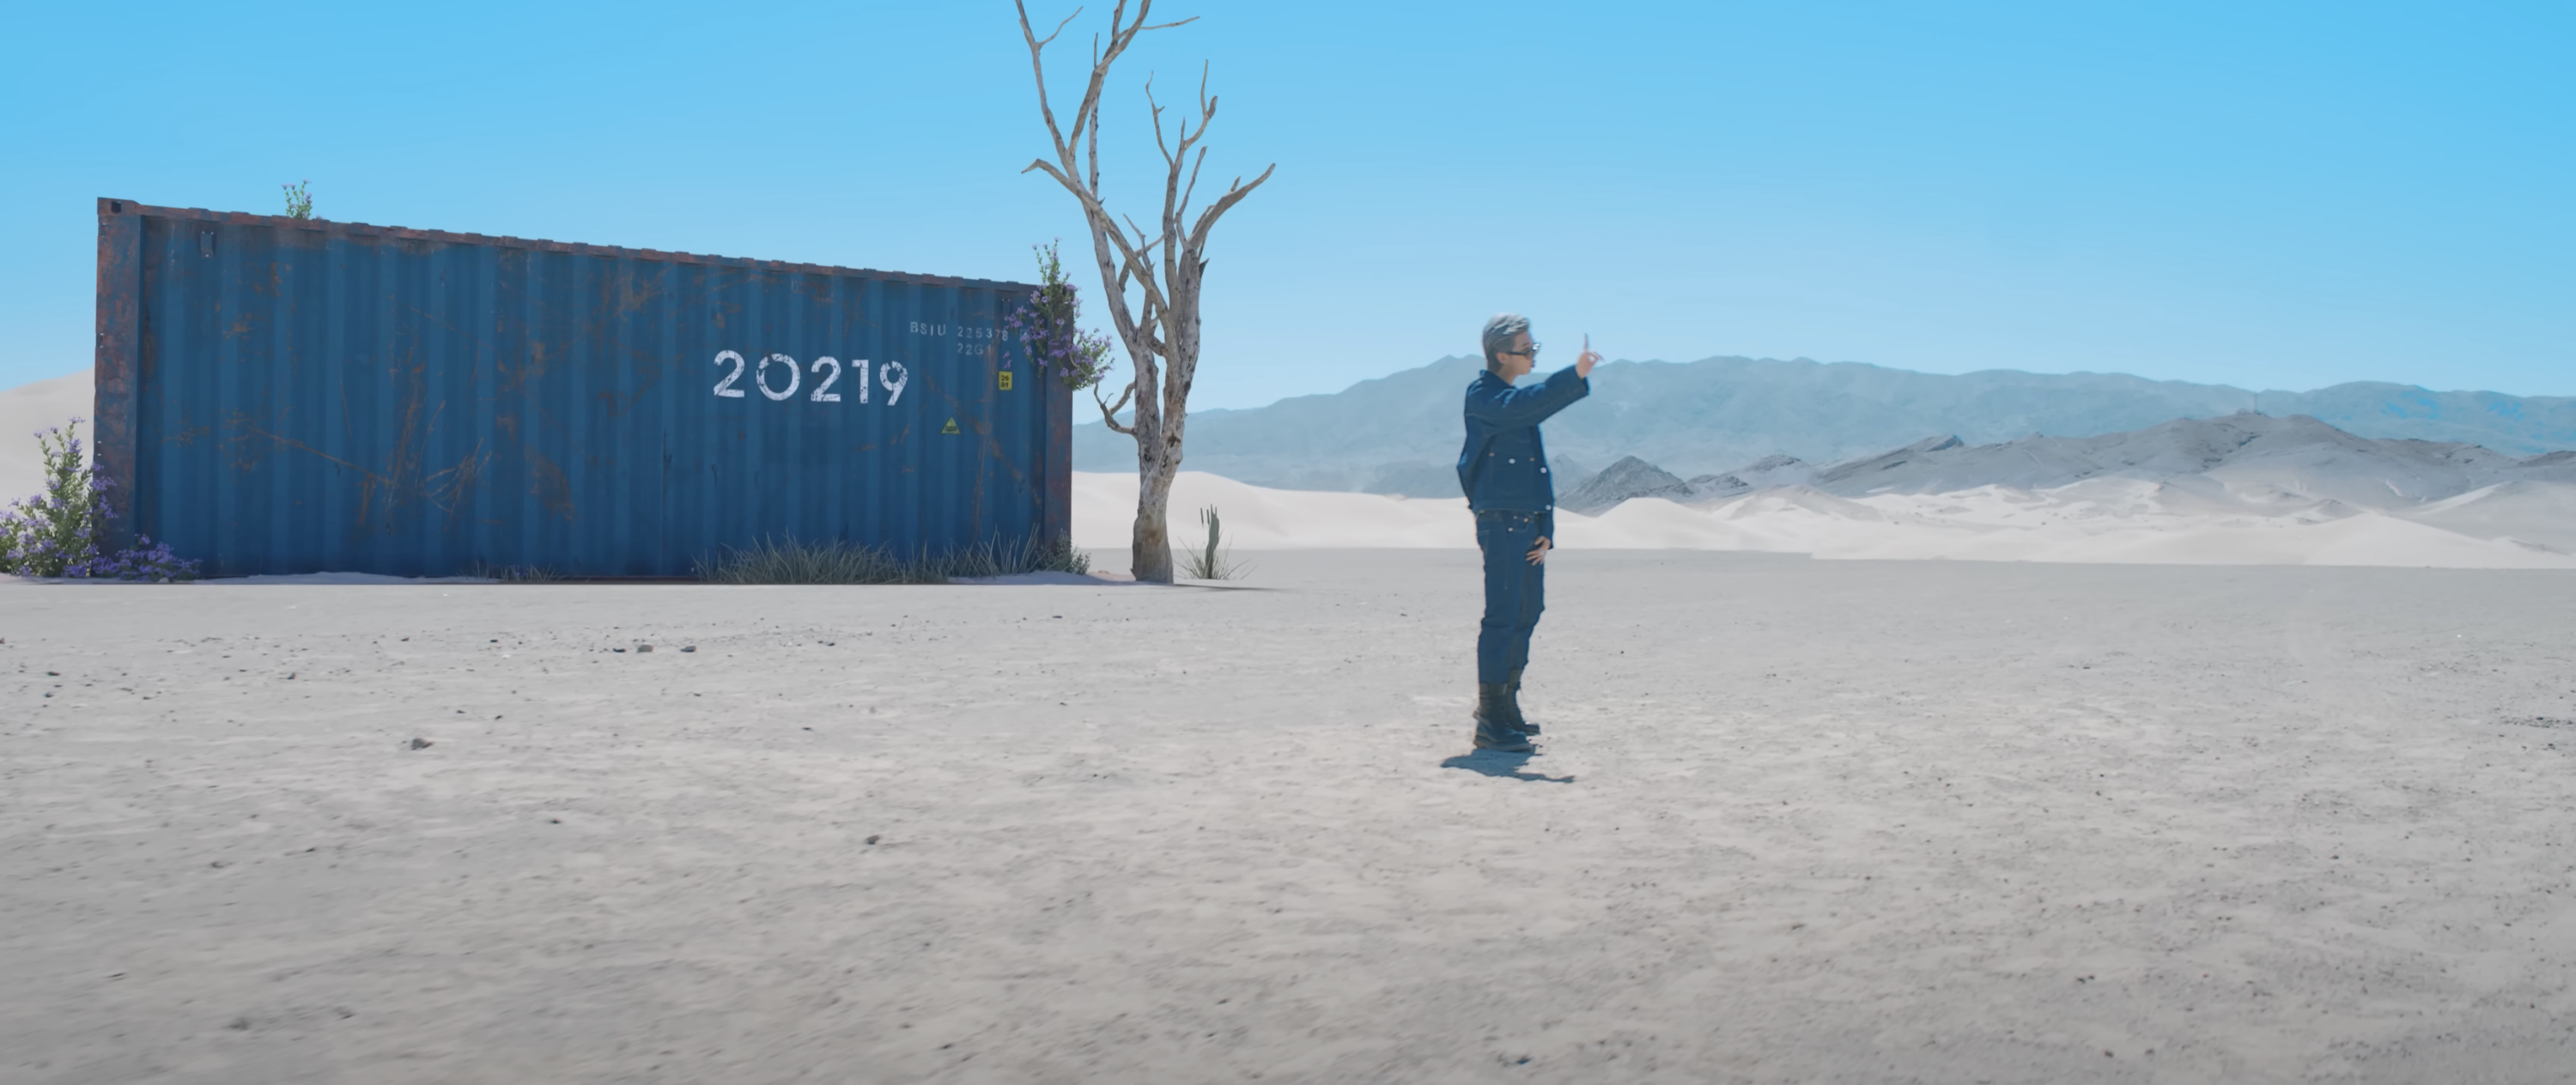 A still from a music video shows a cargo container with the number 20219, a dead tree, and a person with their hand up in a white sandy desert